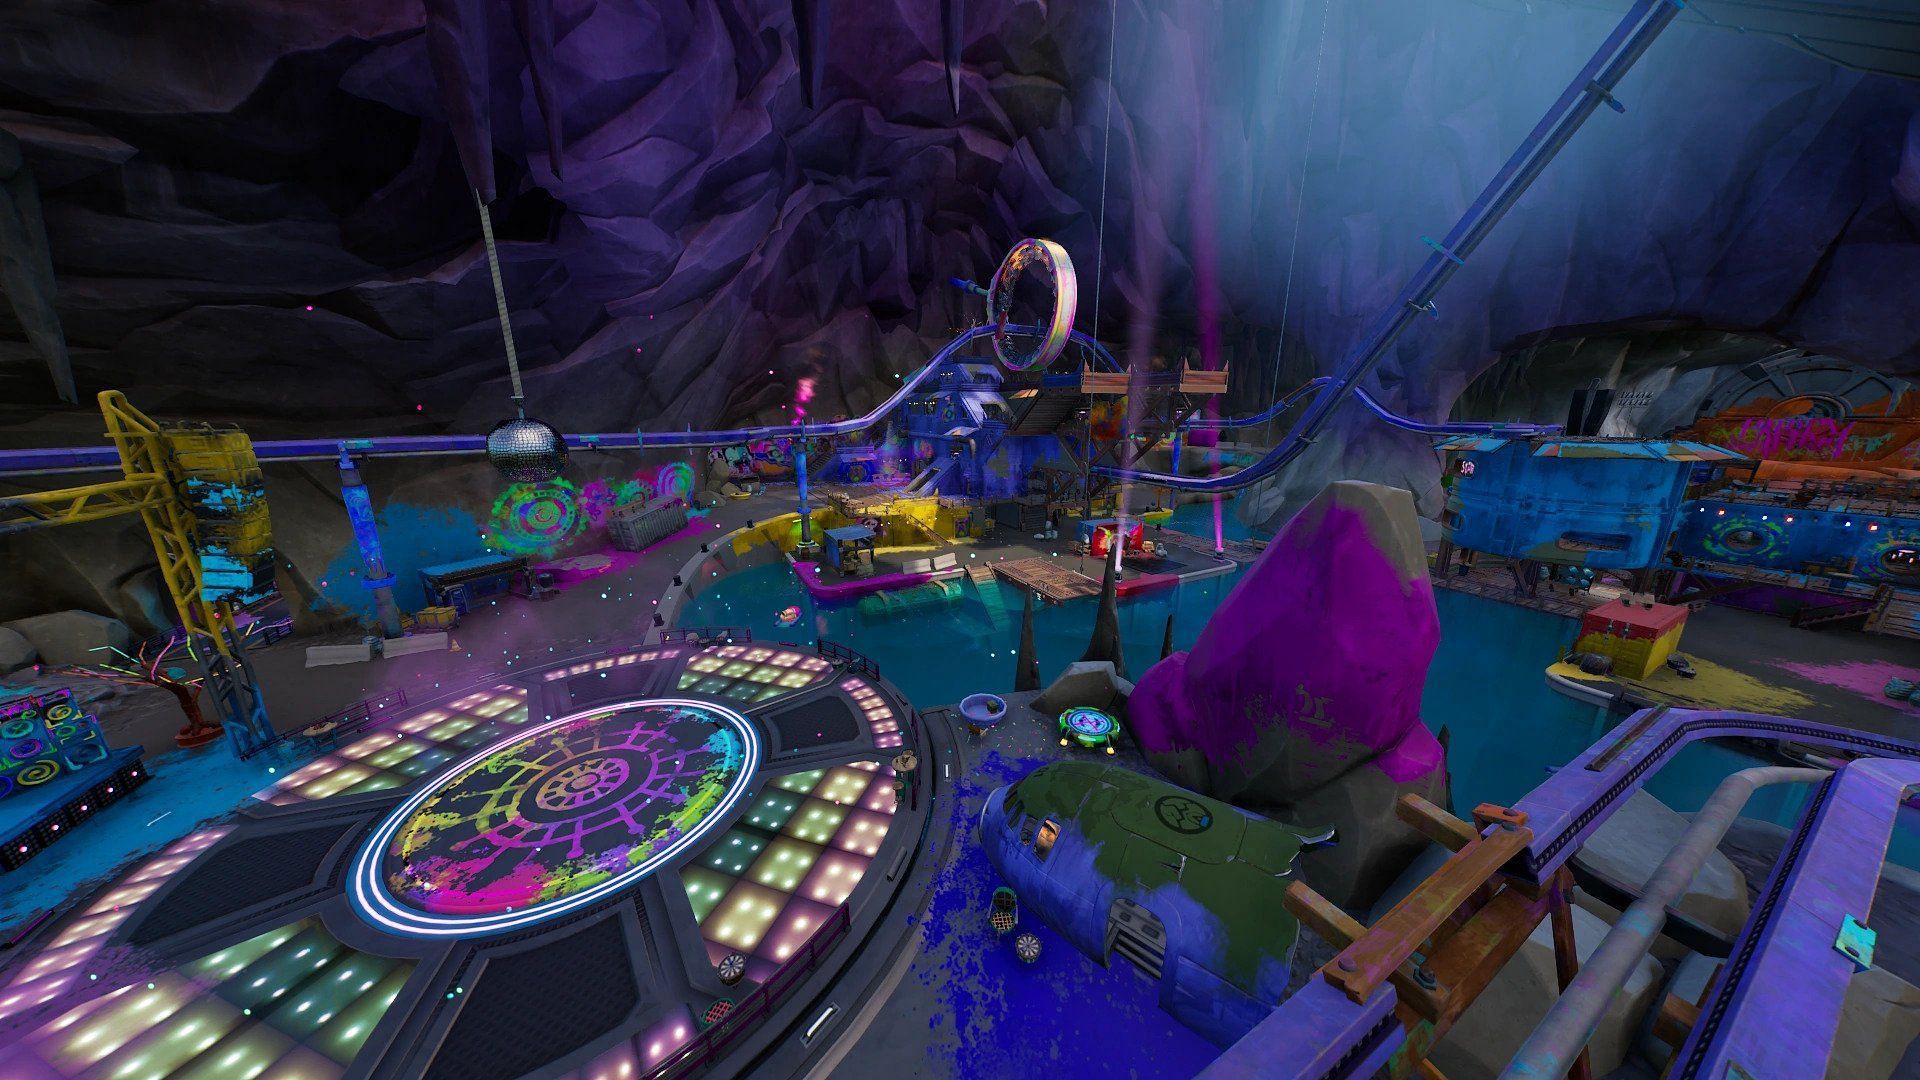 Rave Cave might soon go hushed, courtesy of the loopers (Image via Epic Games)